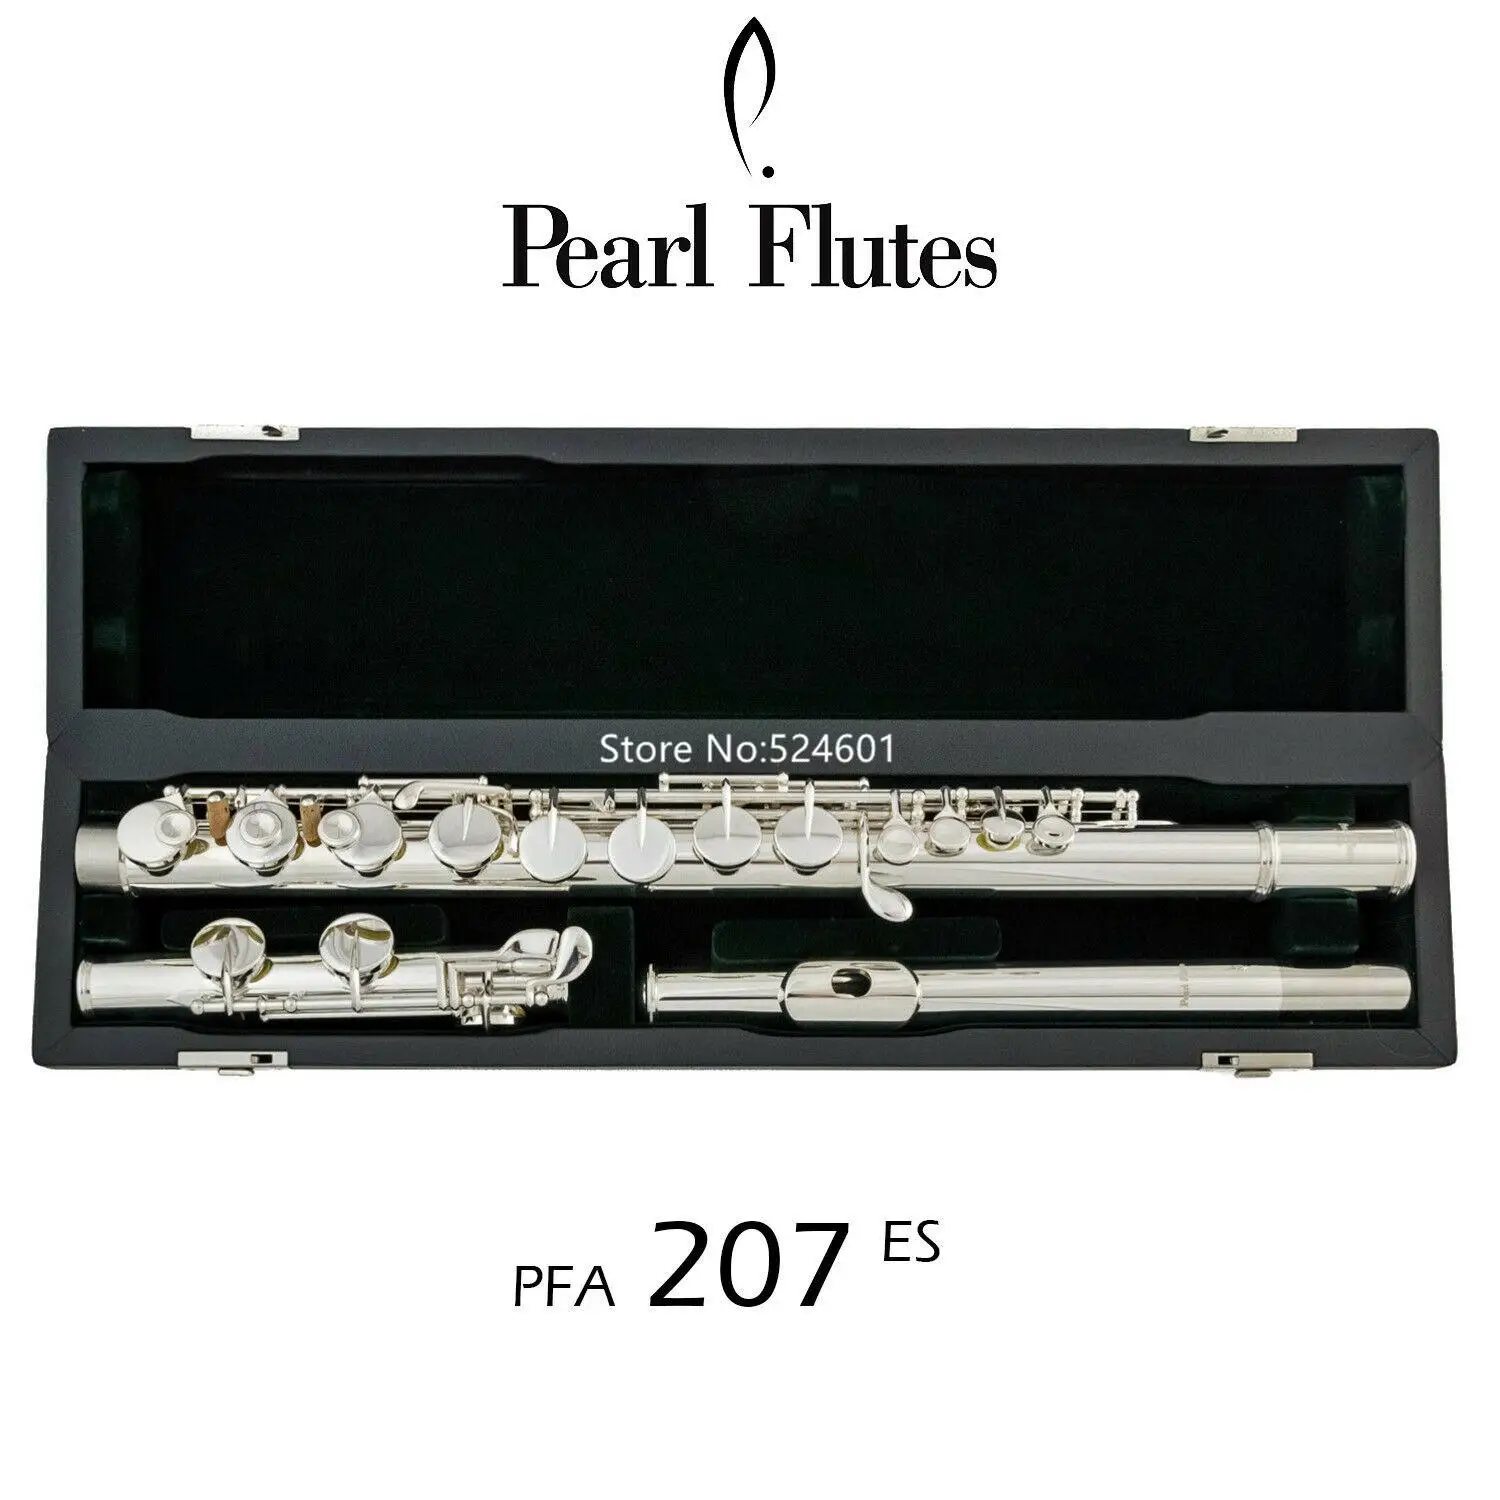 

High Quality Pearl Alto Flute PFA-207-ES 16 keys Closed Hole G Tune Straight Headjoint Sliver Plated Musical instrument